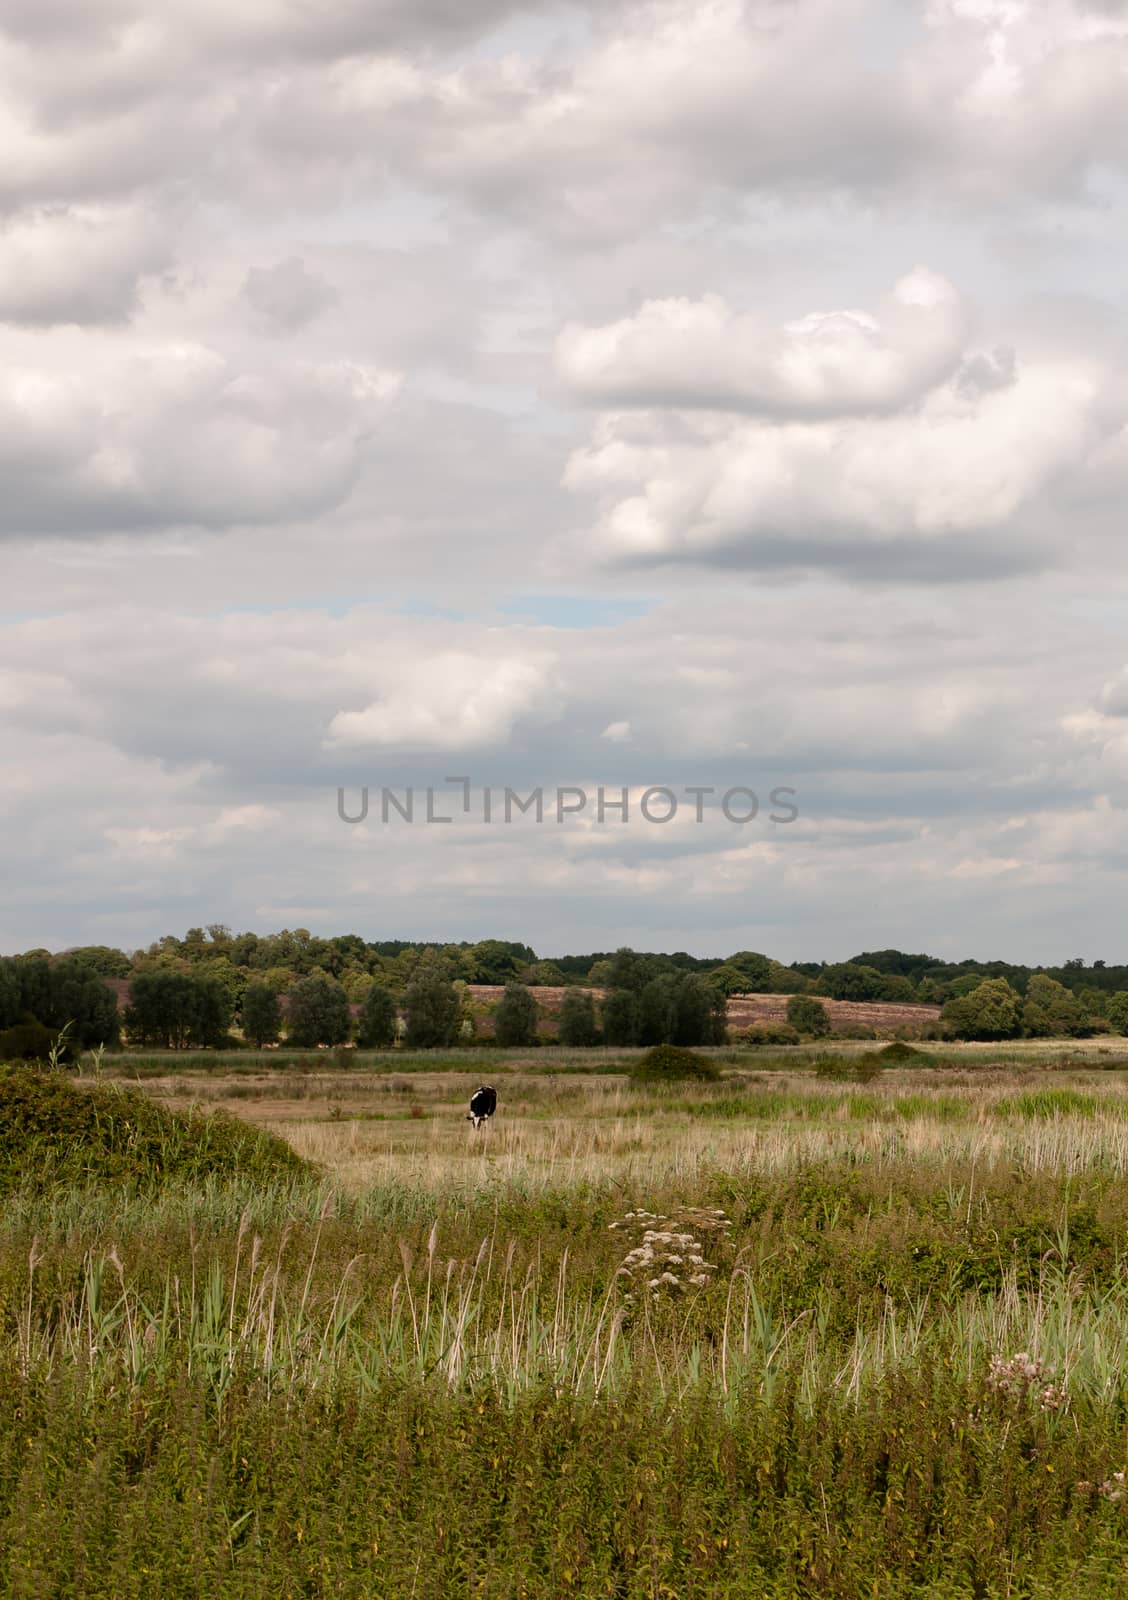 farmland grassland uk meadow outside in country with a cow grazing; UK